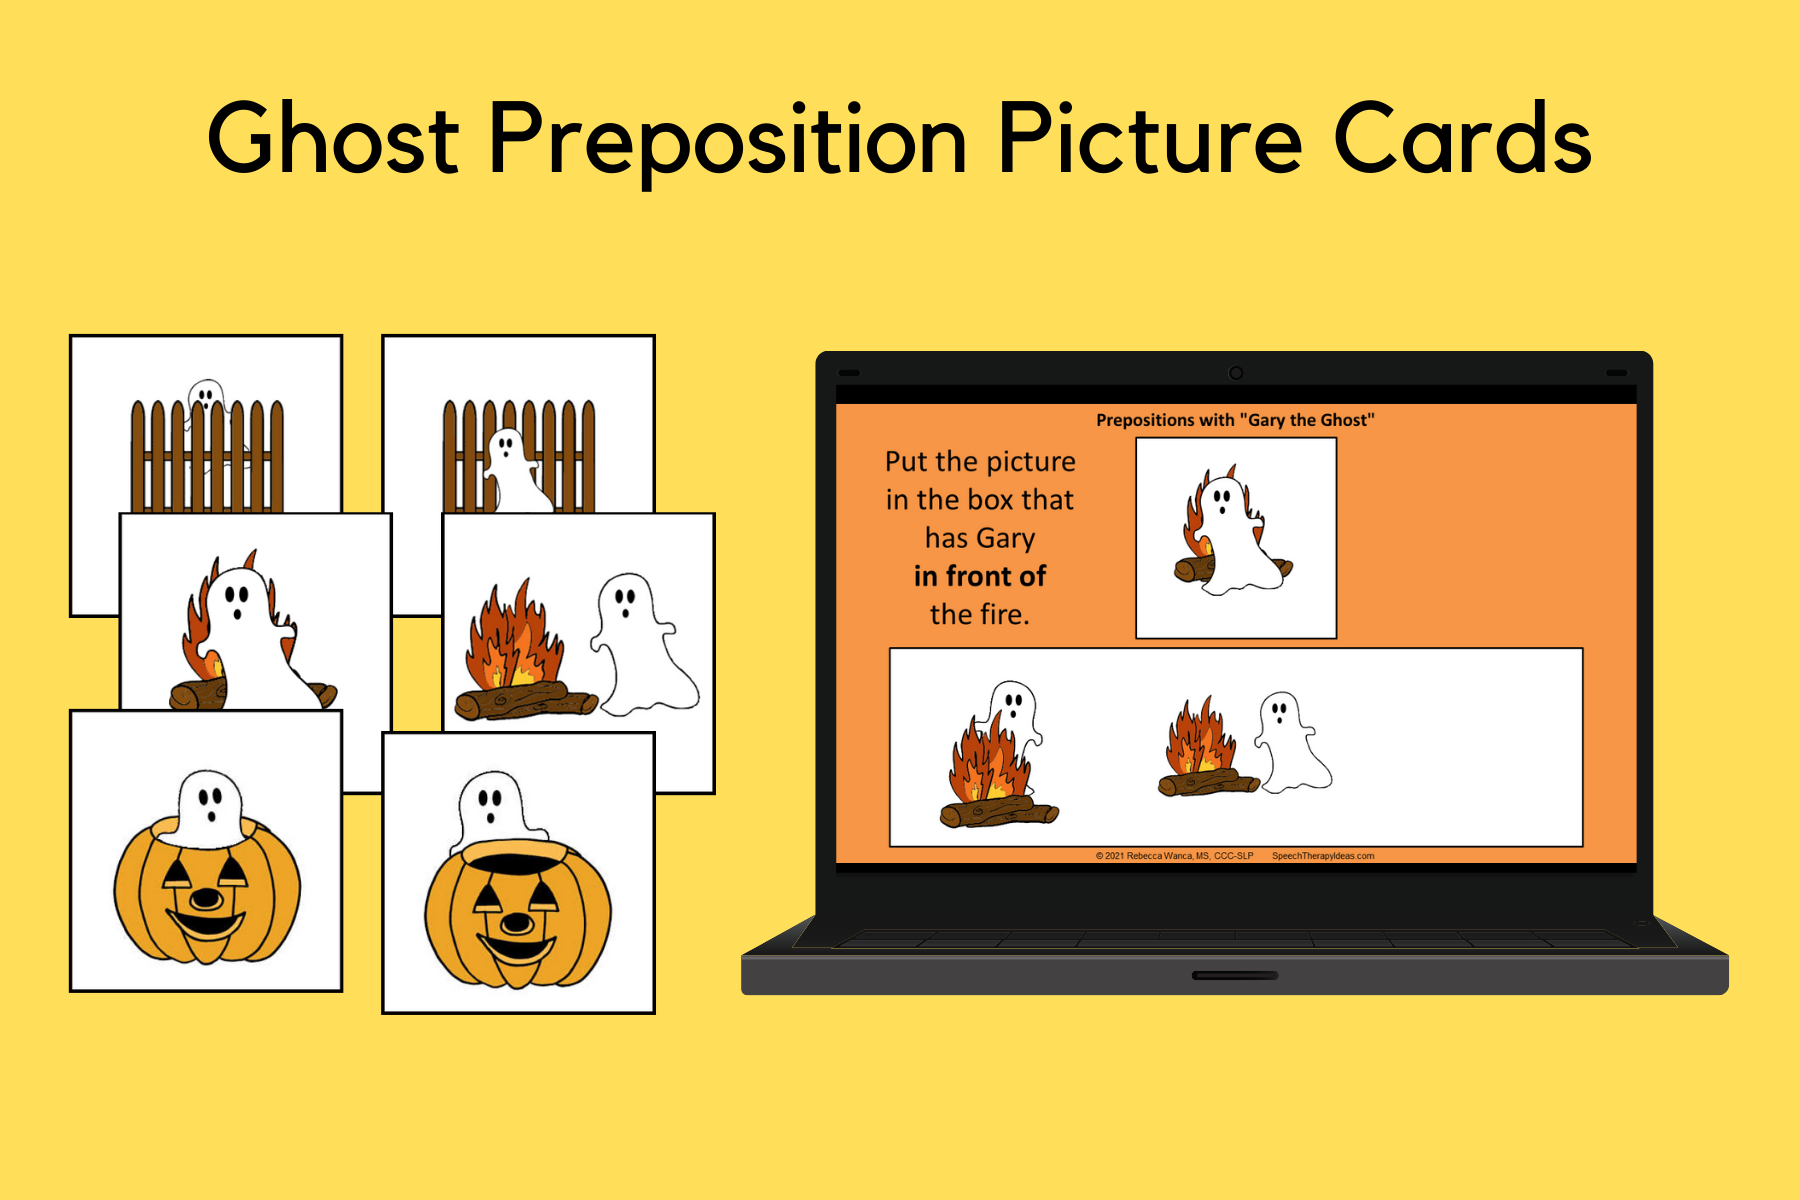 Ghost Preposition Picture Cards